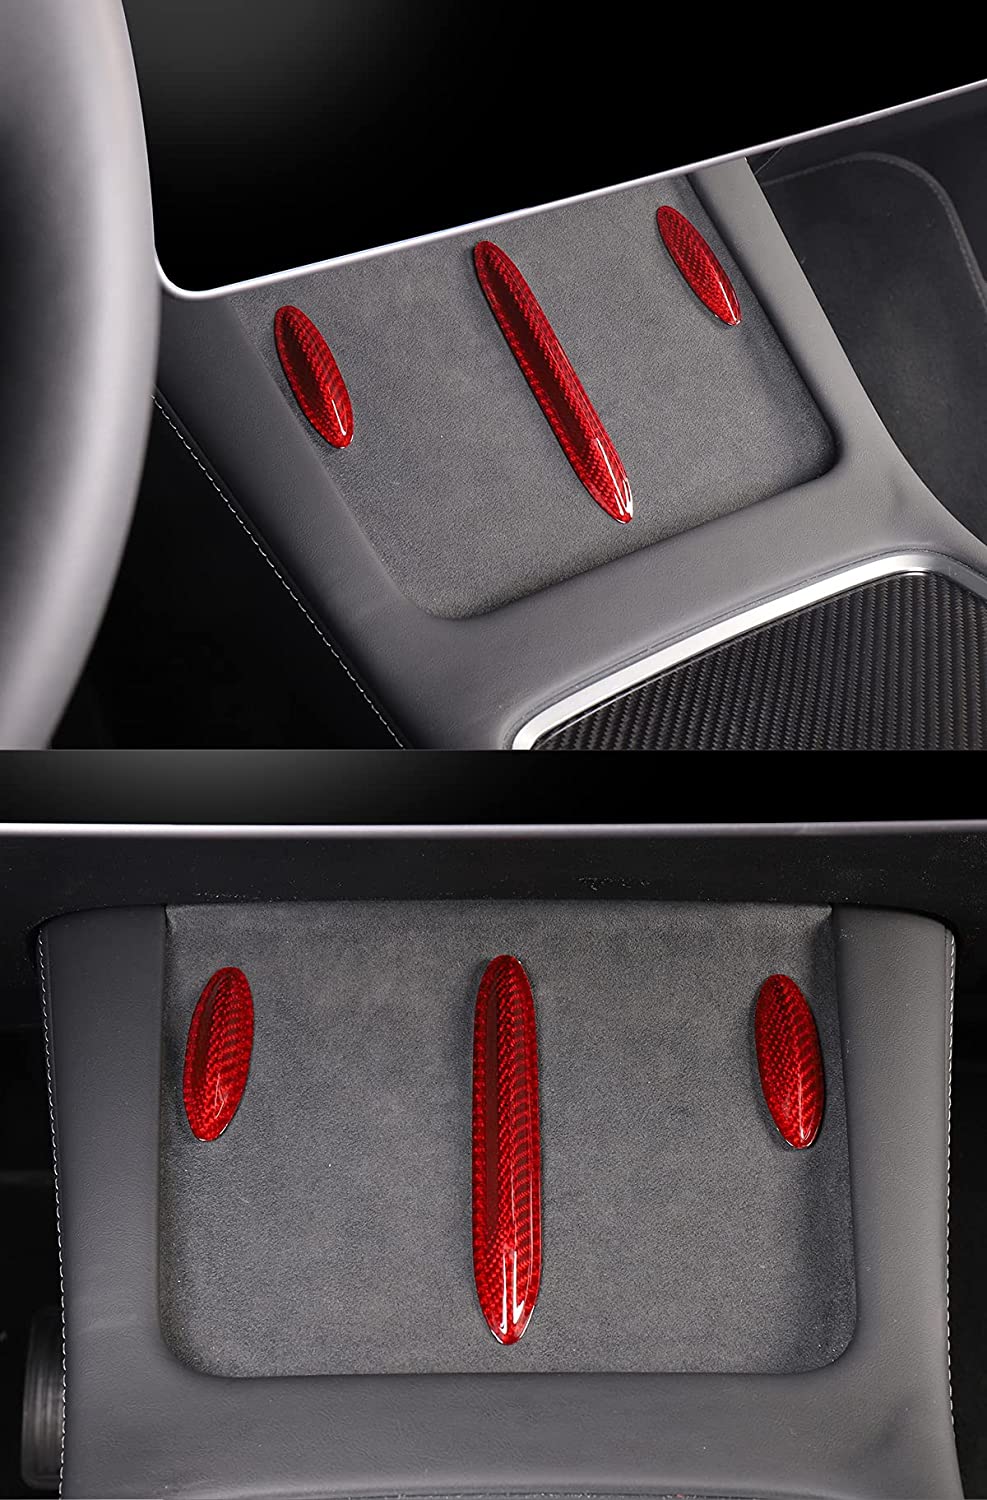 Model 3 / Y Central Control Panel Stickers - Carbon Fiber Interior Mods - Tesery Official Store